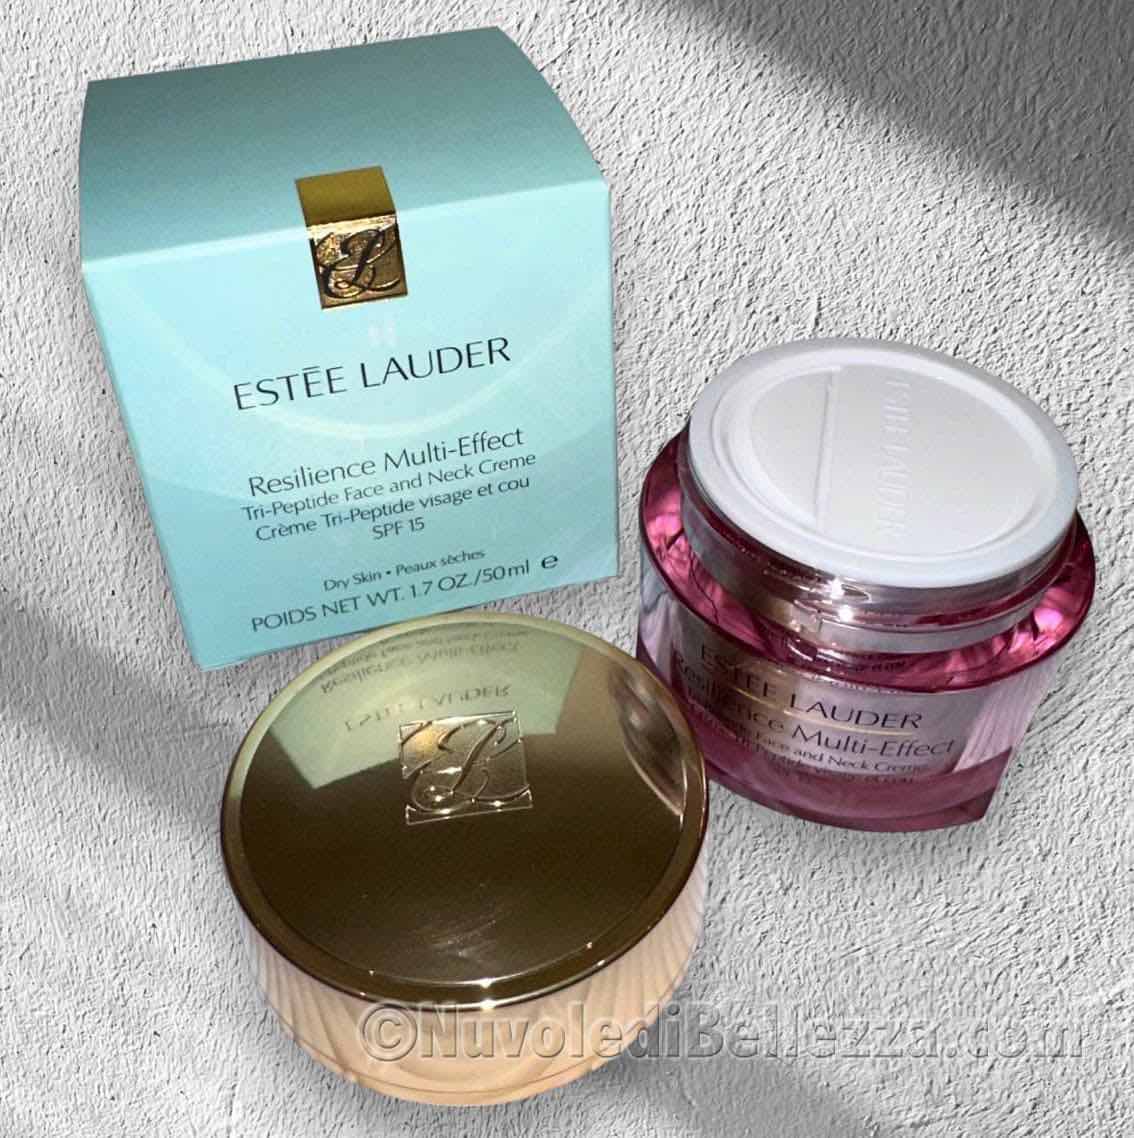 Estee Lauder Resilience Multi-Effect Firming Lifting SPF 15 Opinioni